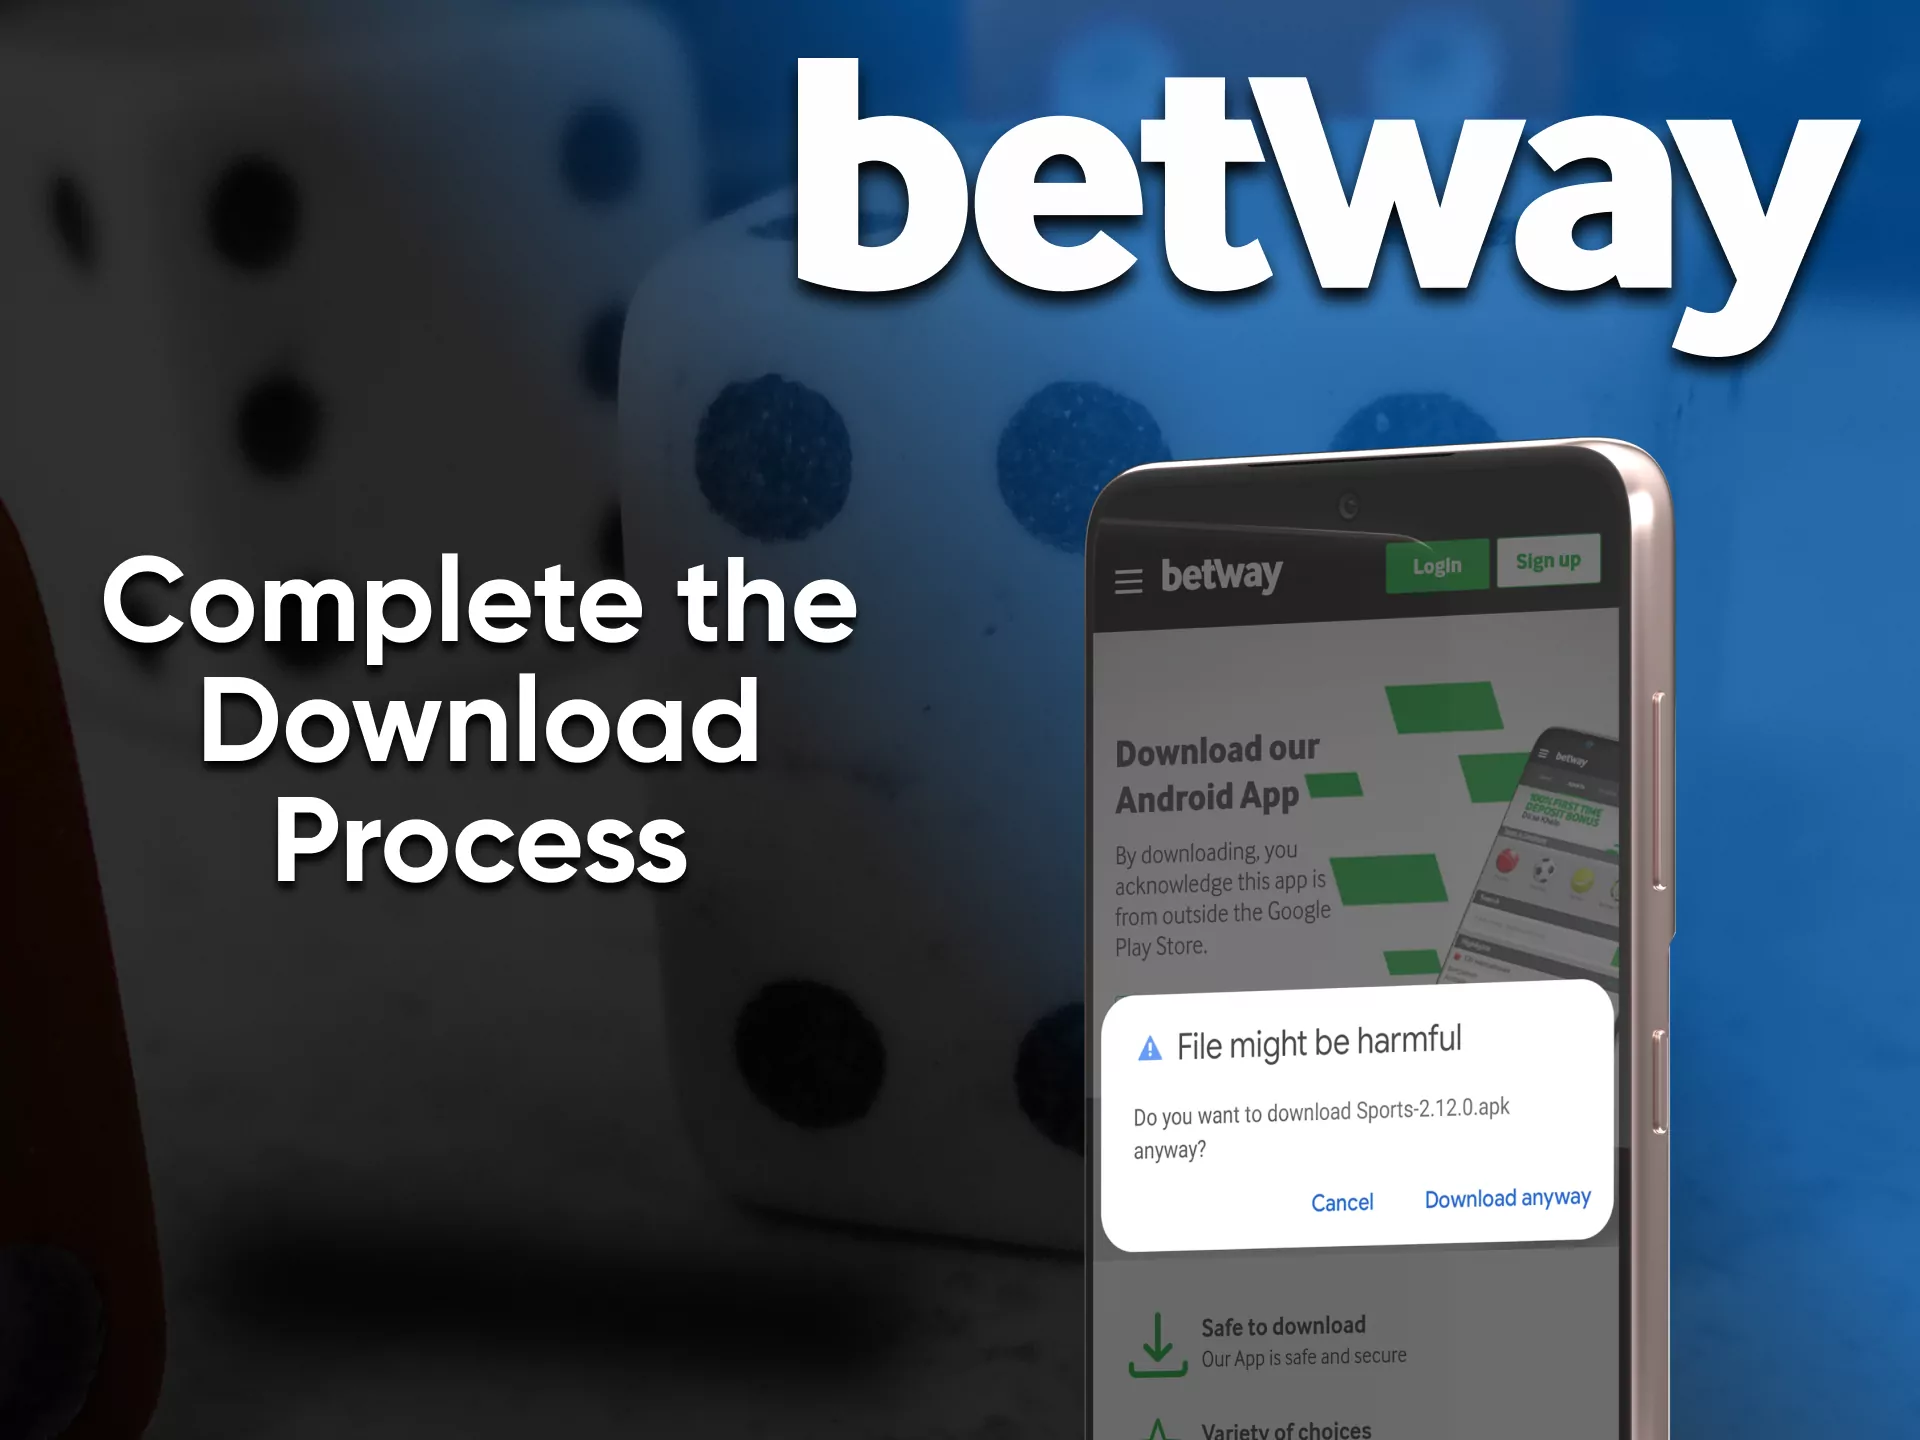 For playing the Betway casino game you need to download the app.